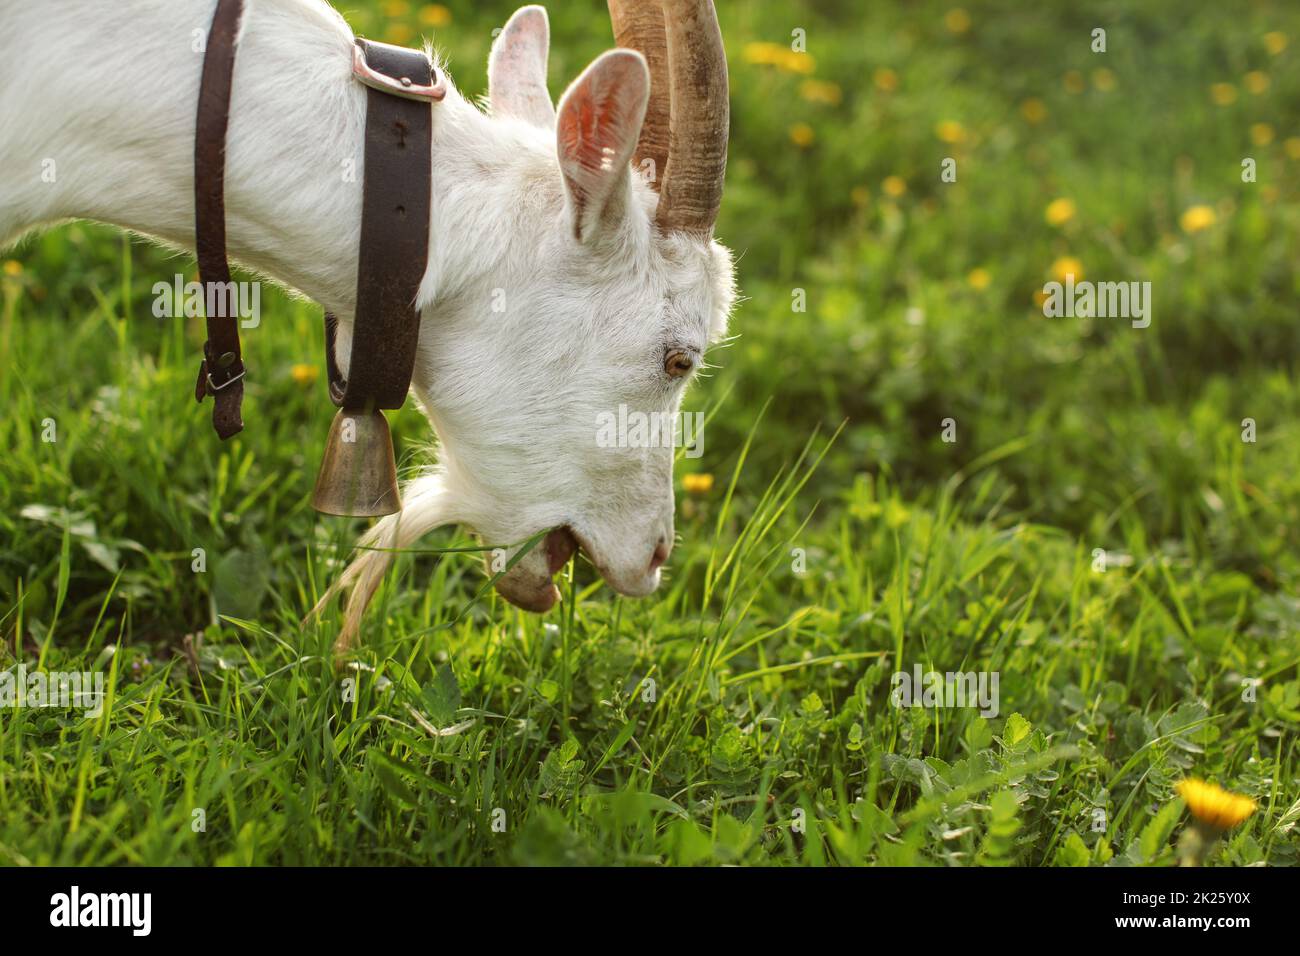 Female goat grazing, eating grass, mouth open. Detail on head, and neck with bell. Stock Photo